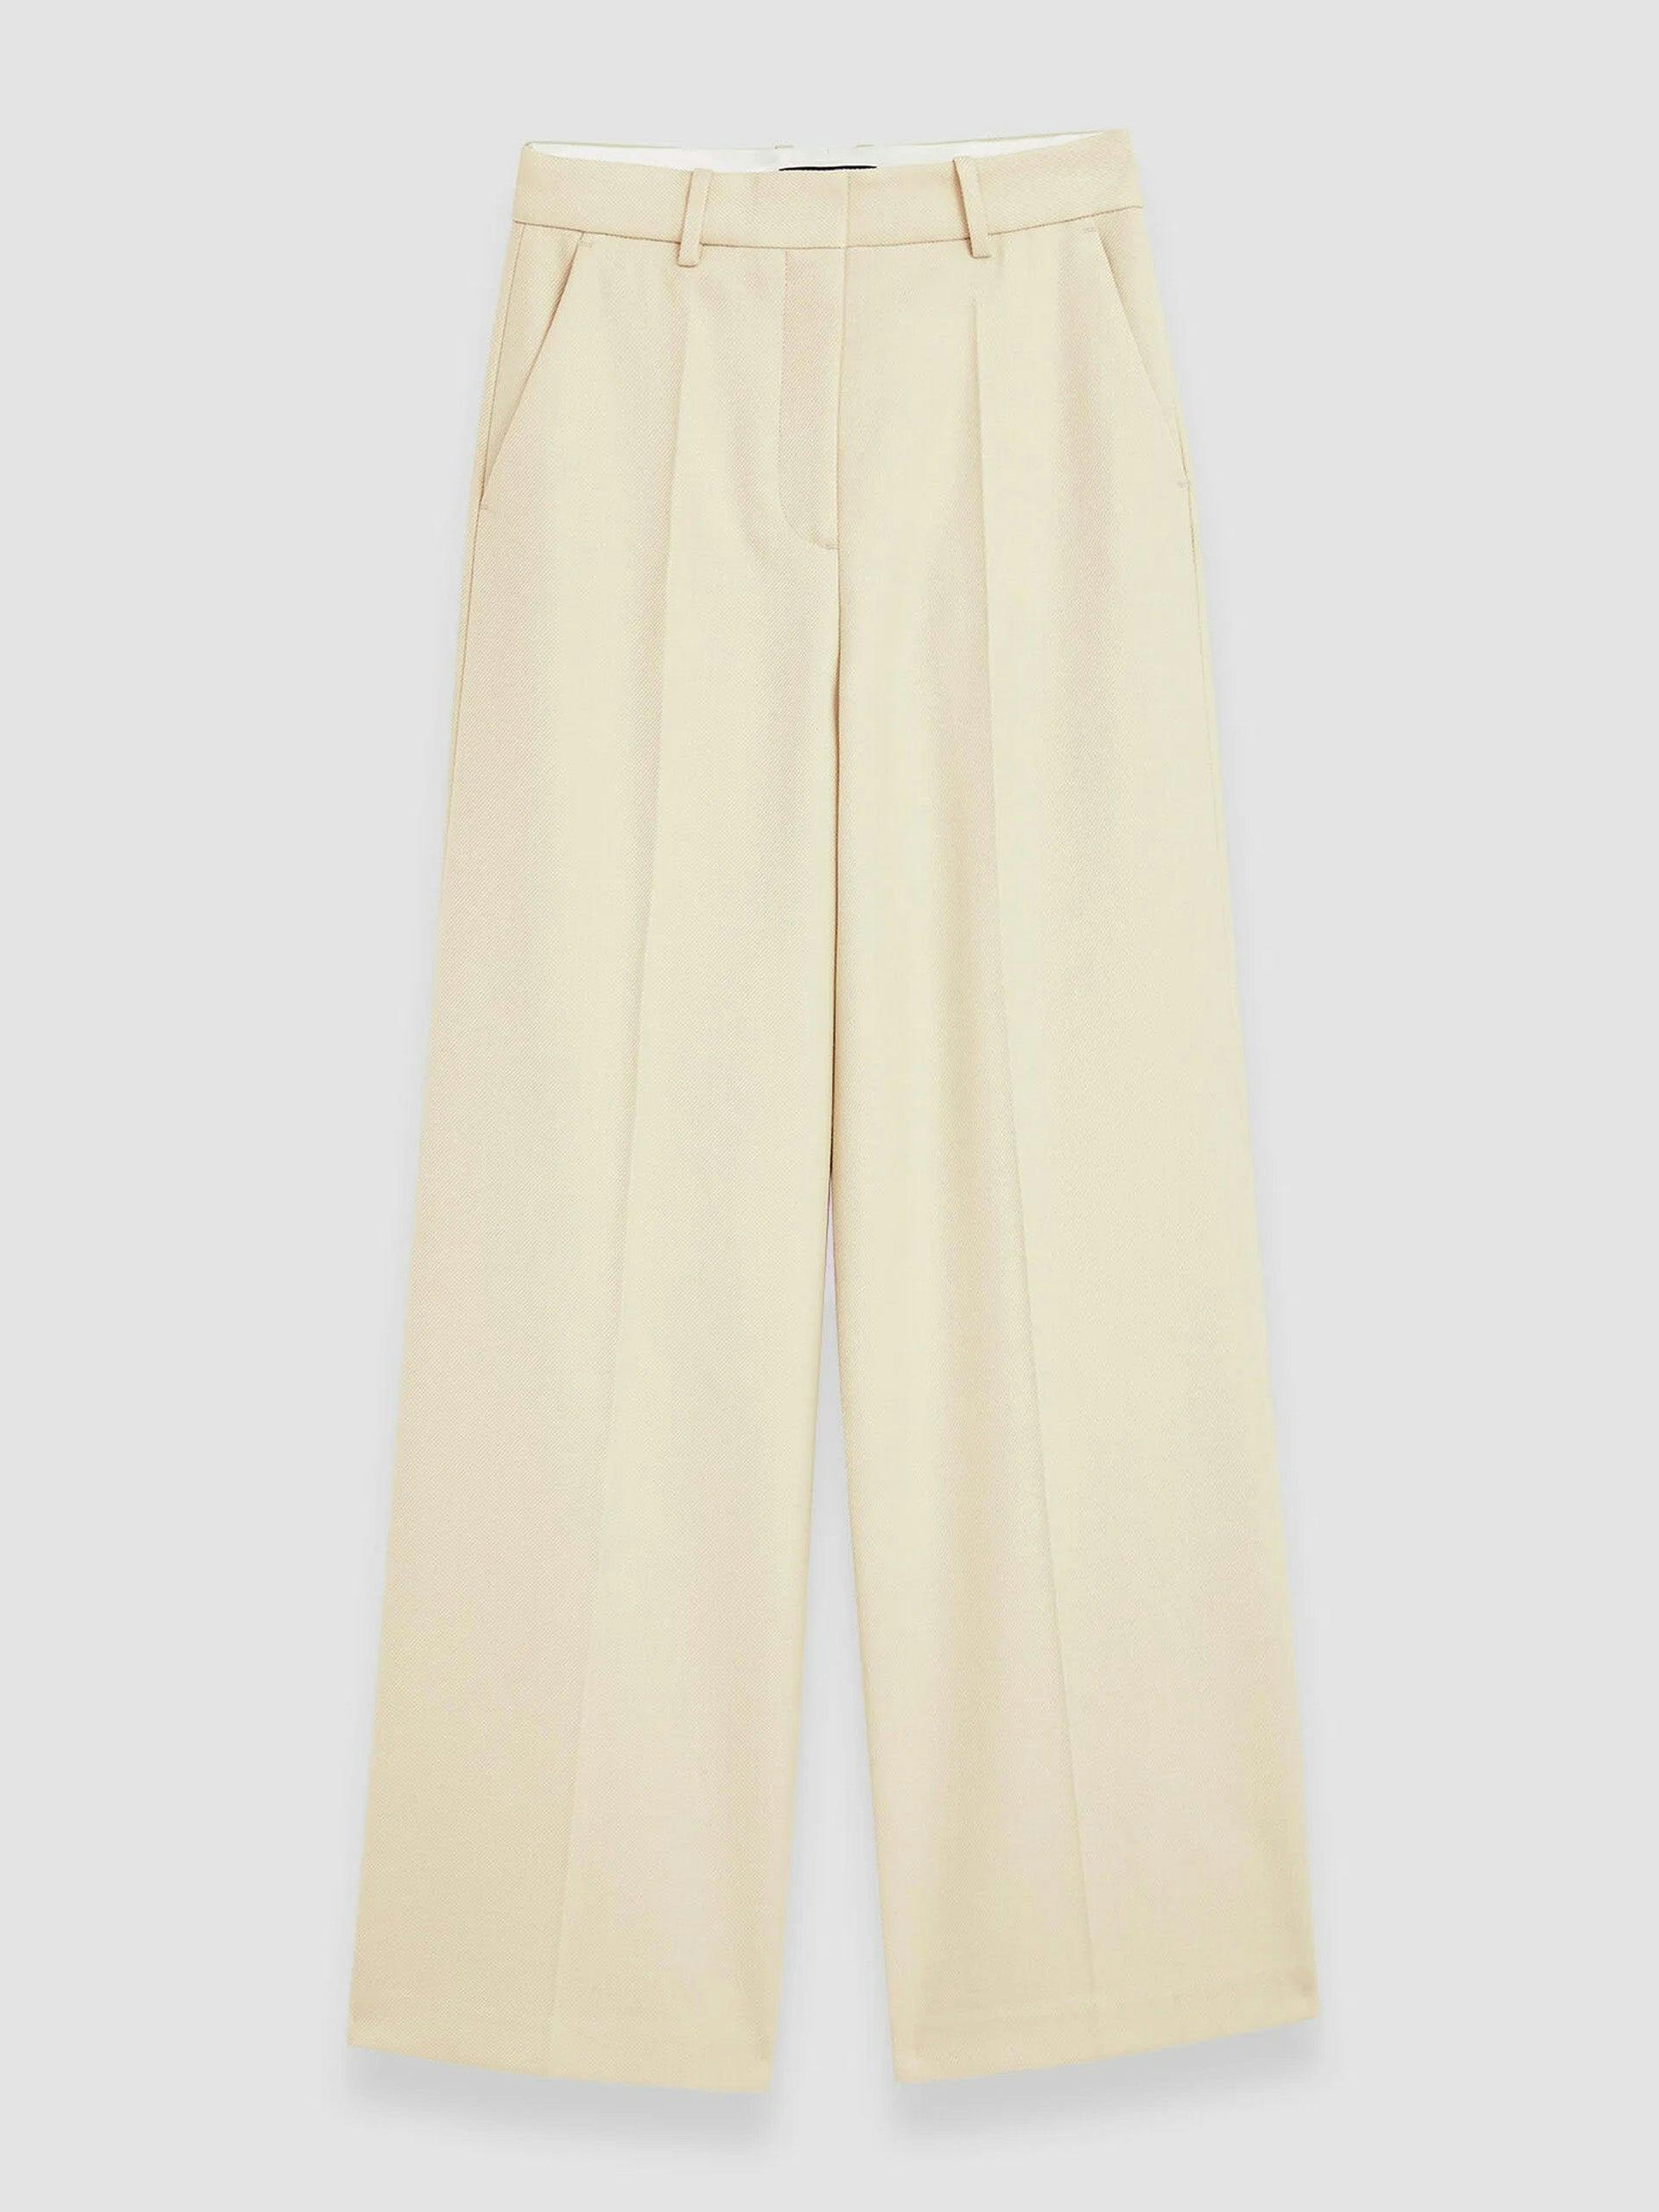 Alana wool trousers in Pale Olive